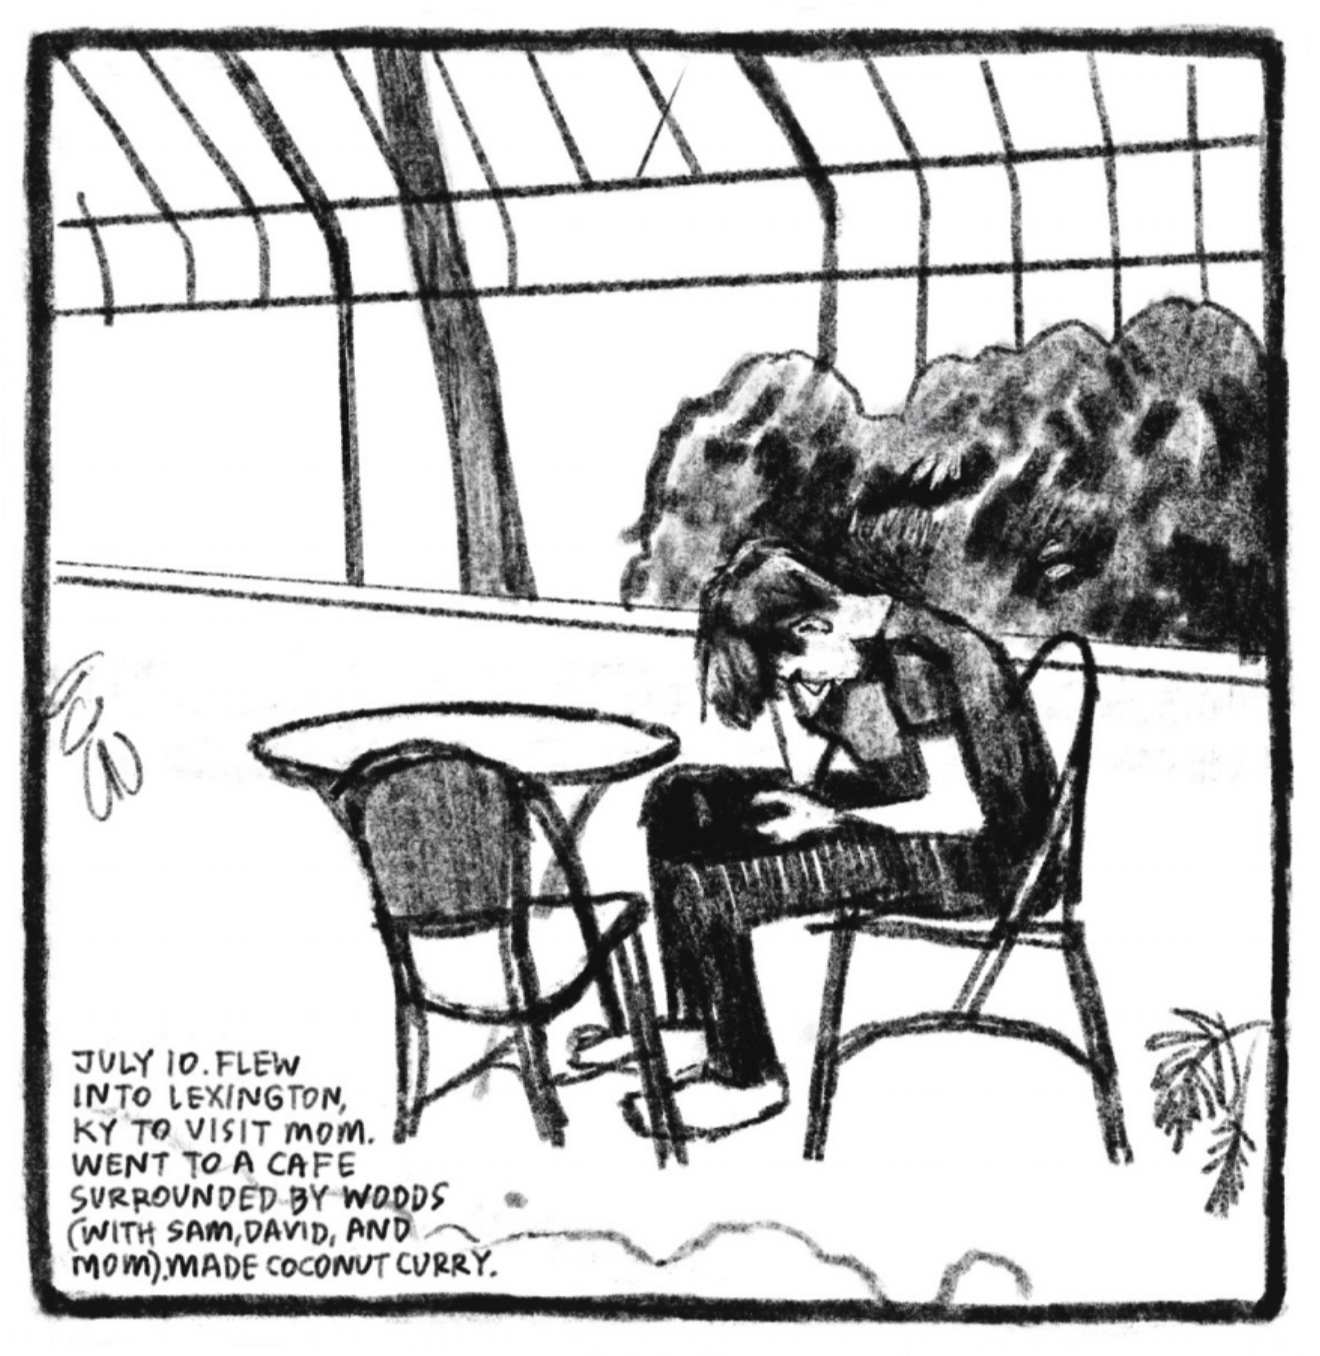 3. Enzo sits at a small outdoor cafe-style table. His chair is pushed back and he bends down, resting his elbows on his legs and looking at something on his thighs, perhaps his phone. The scene appears to be enclosed by a green-house style structure, a clear tent-like building that reveals bushes and a tree in the background. â€œJuly 10. Flew into Lexington, KY to visit Mom. Went to a cafe surrounded by woods (with Sam, David, and Mom). Made coconut curry.â€